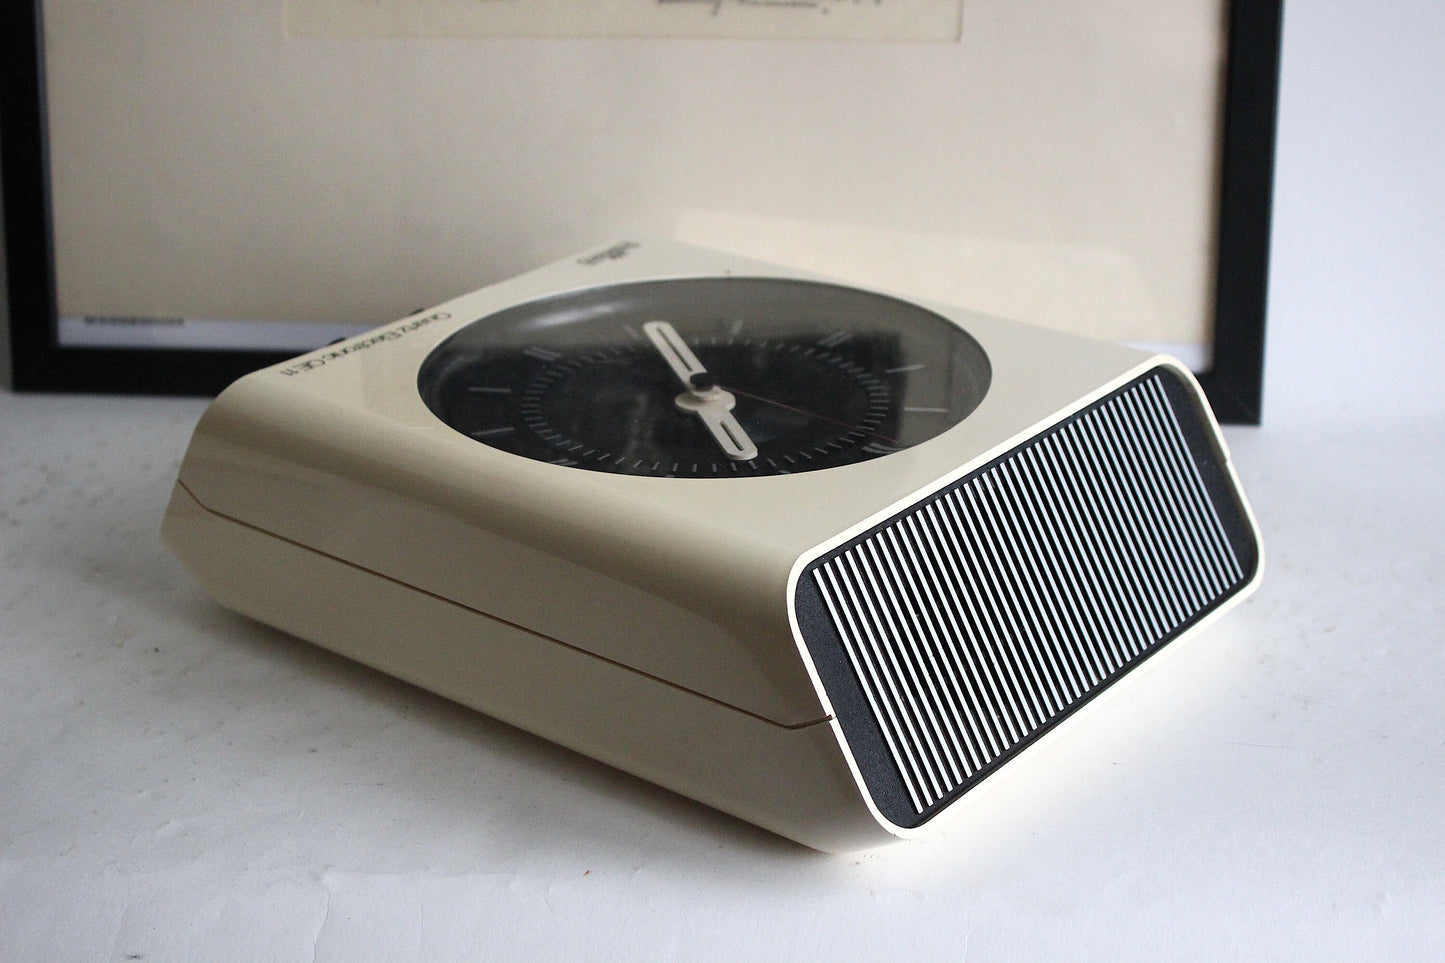 Vintage Intercord Quartz Electronic QE11 Clock Radio - Early 1970s German Space Age Design, Table or Wall Mountable